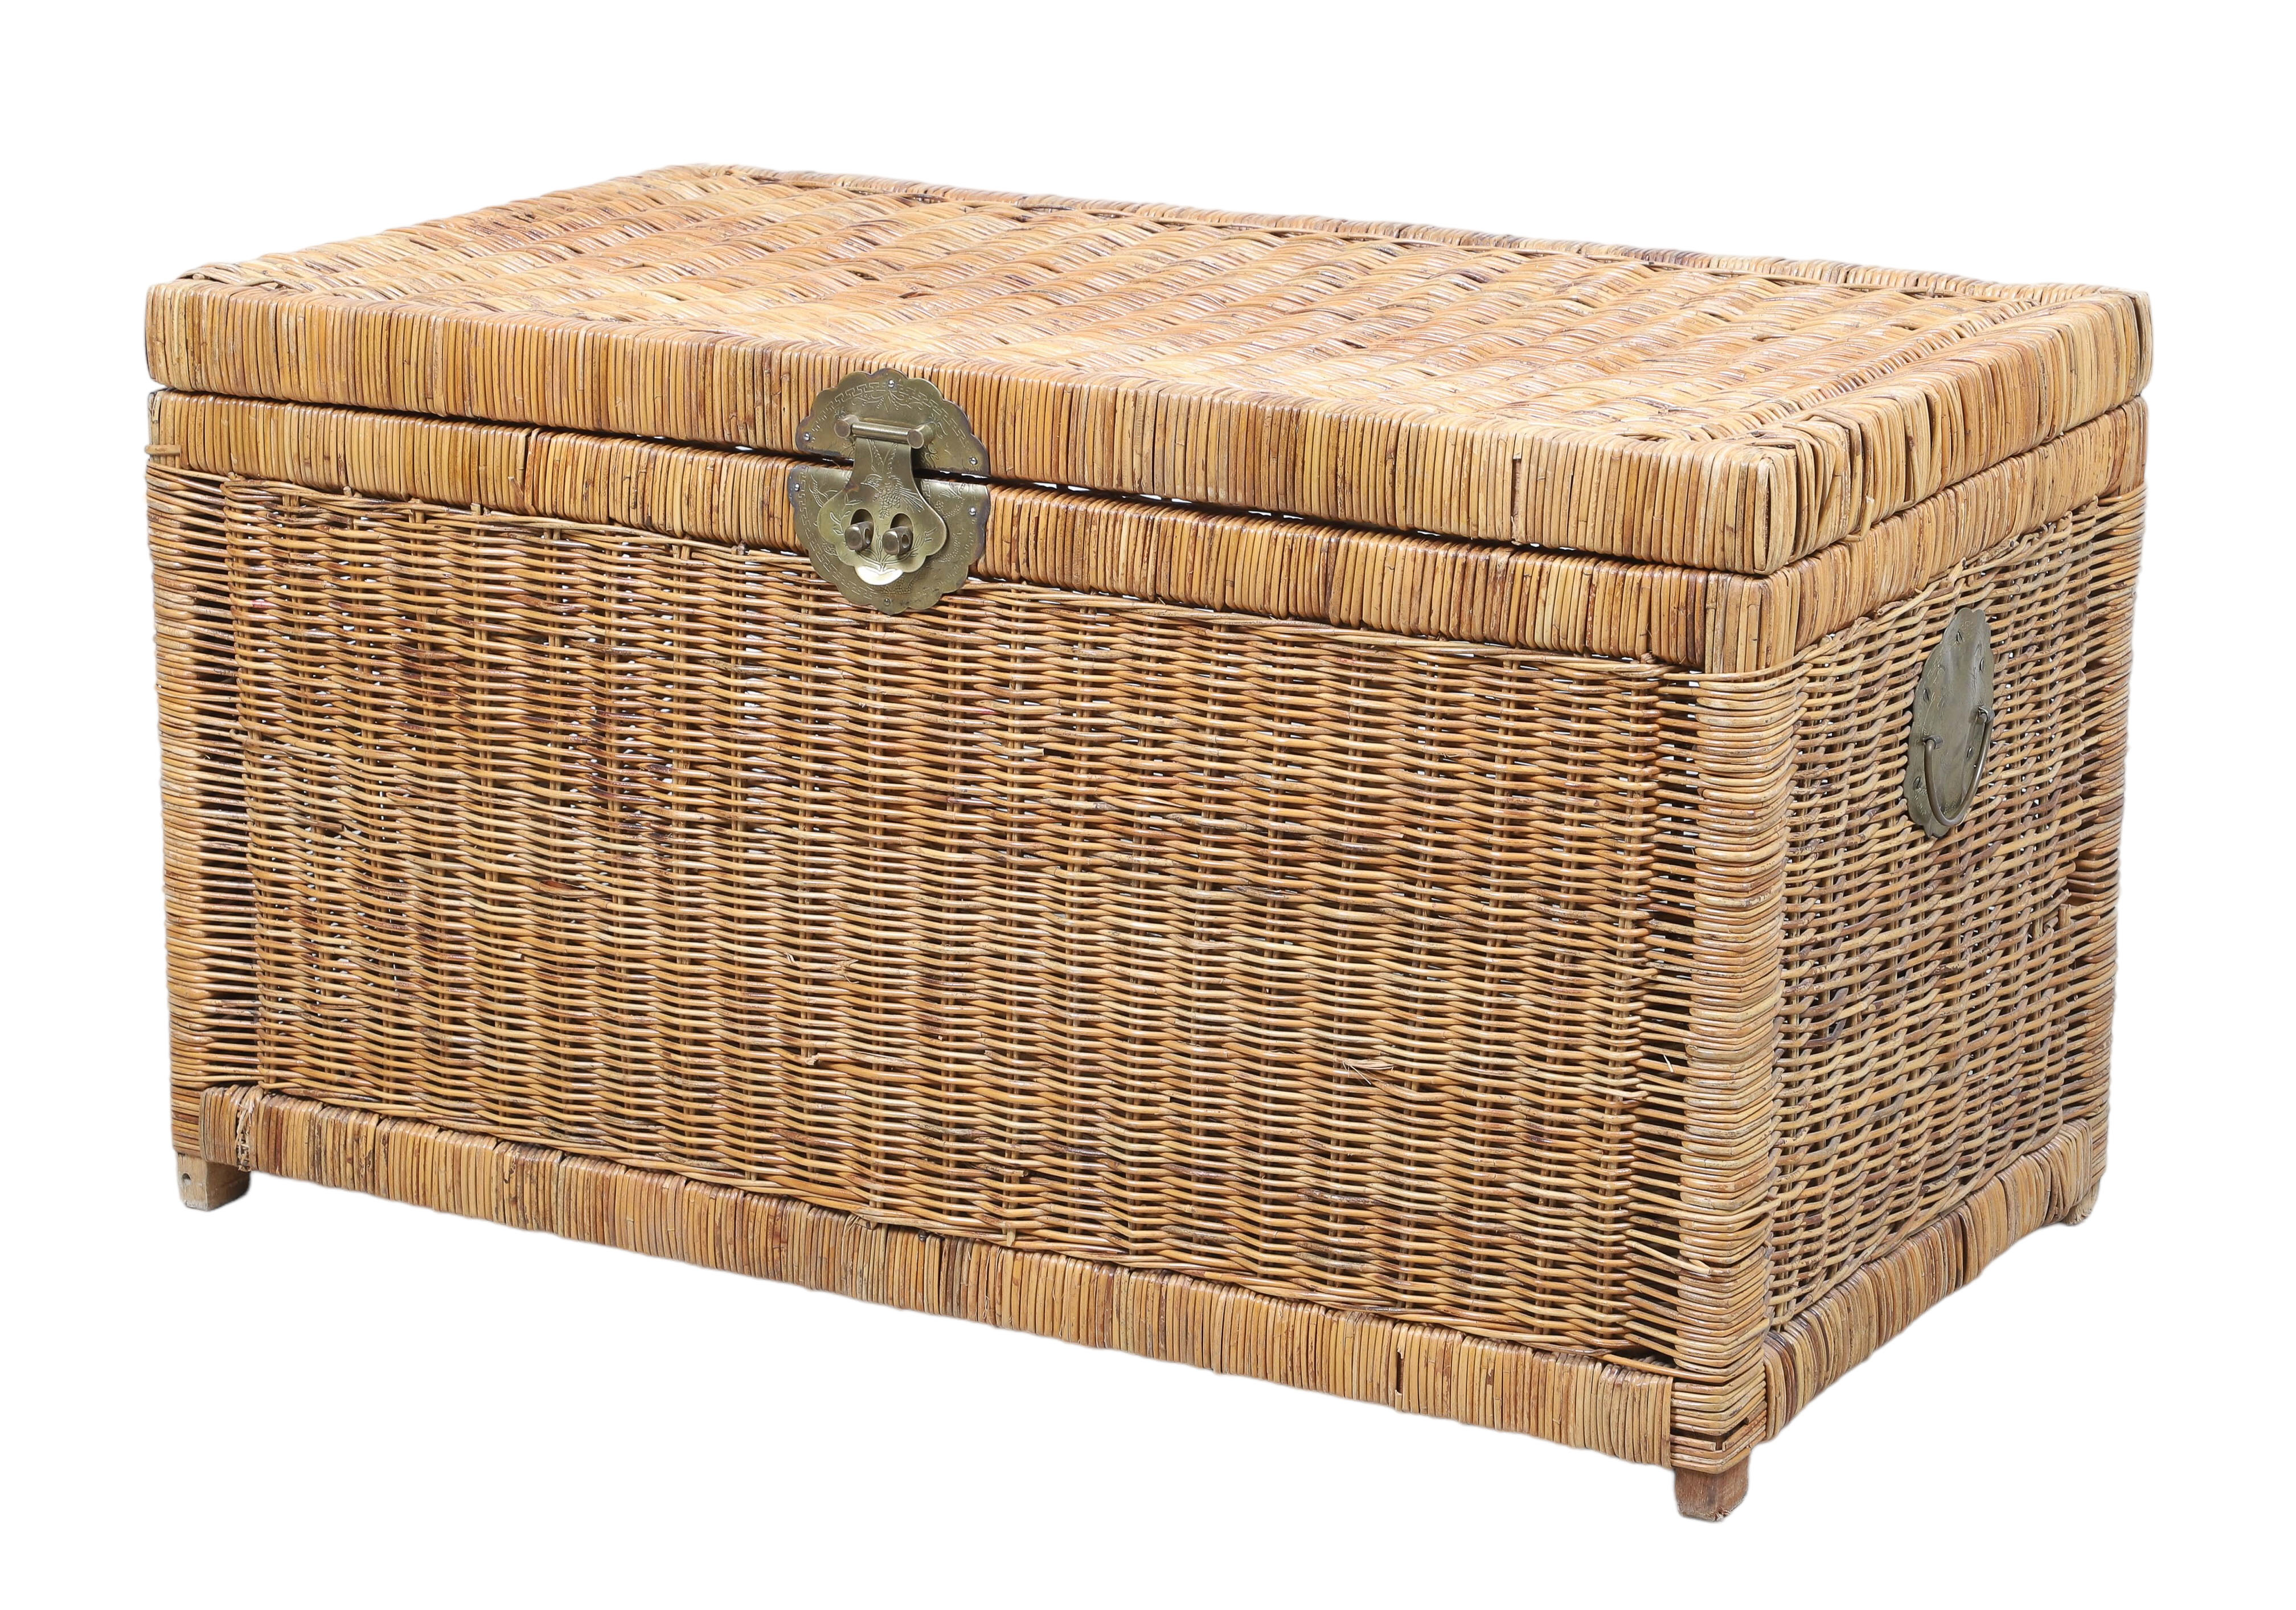 A large wicker and brass trunk  2e1af9